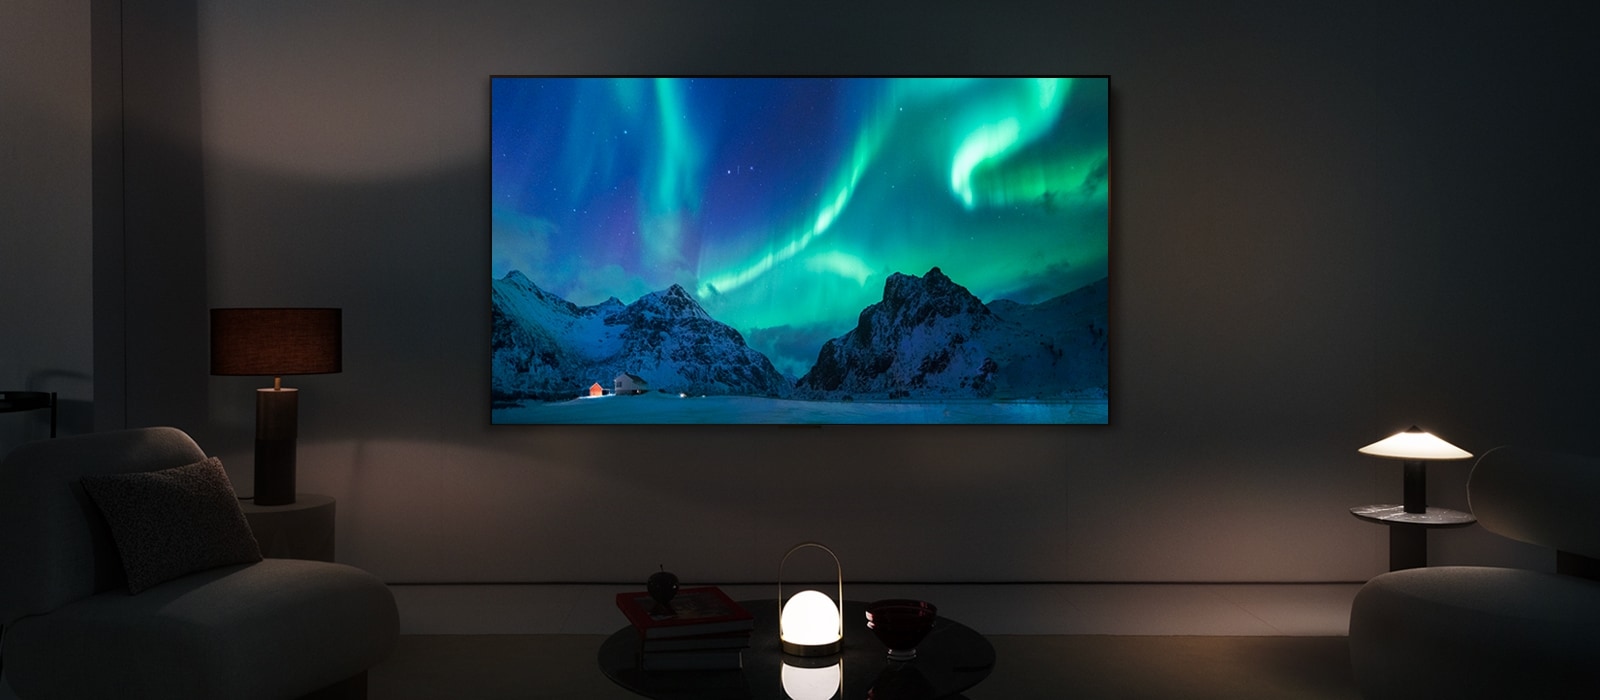 An image of an LG OLED TV and LG Soundbar in a modern living space in nighttime. The image of the aurora borealis is displayed with the ideal brightness levels.